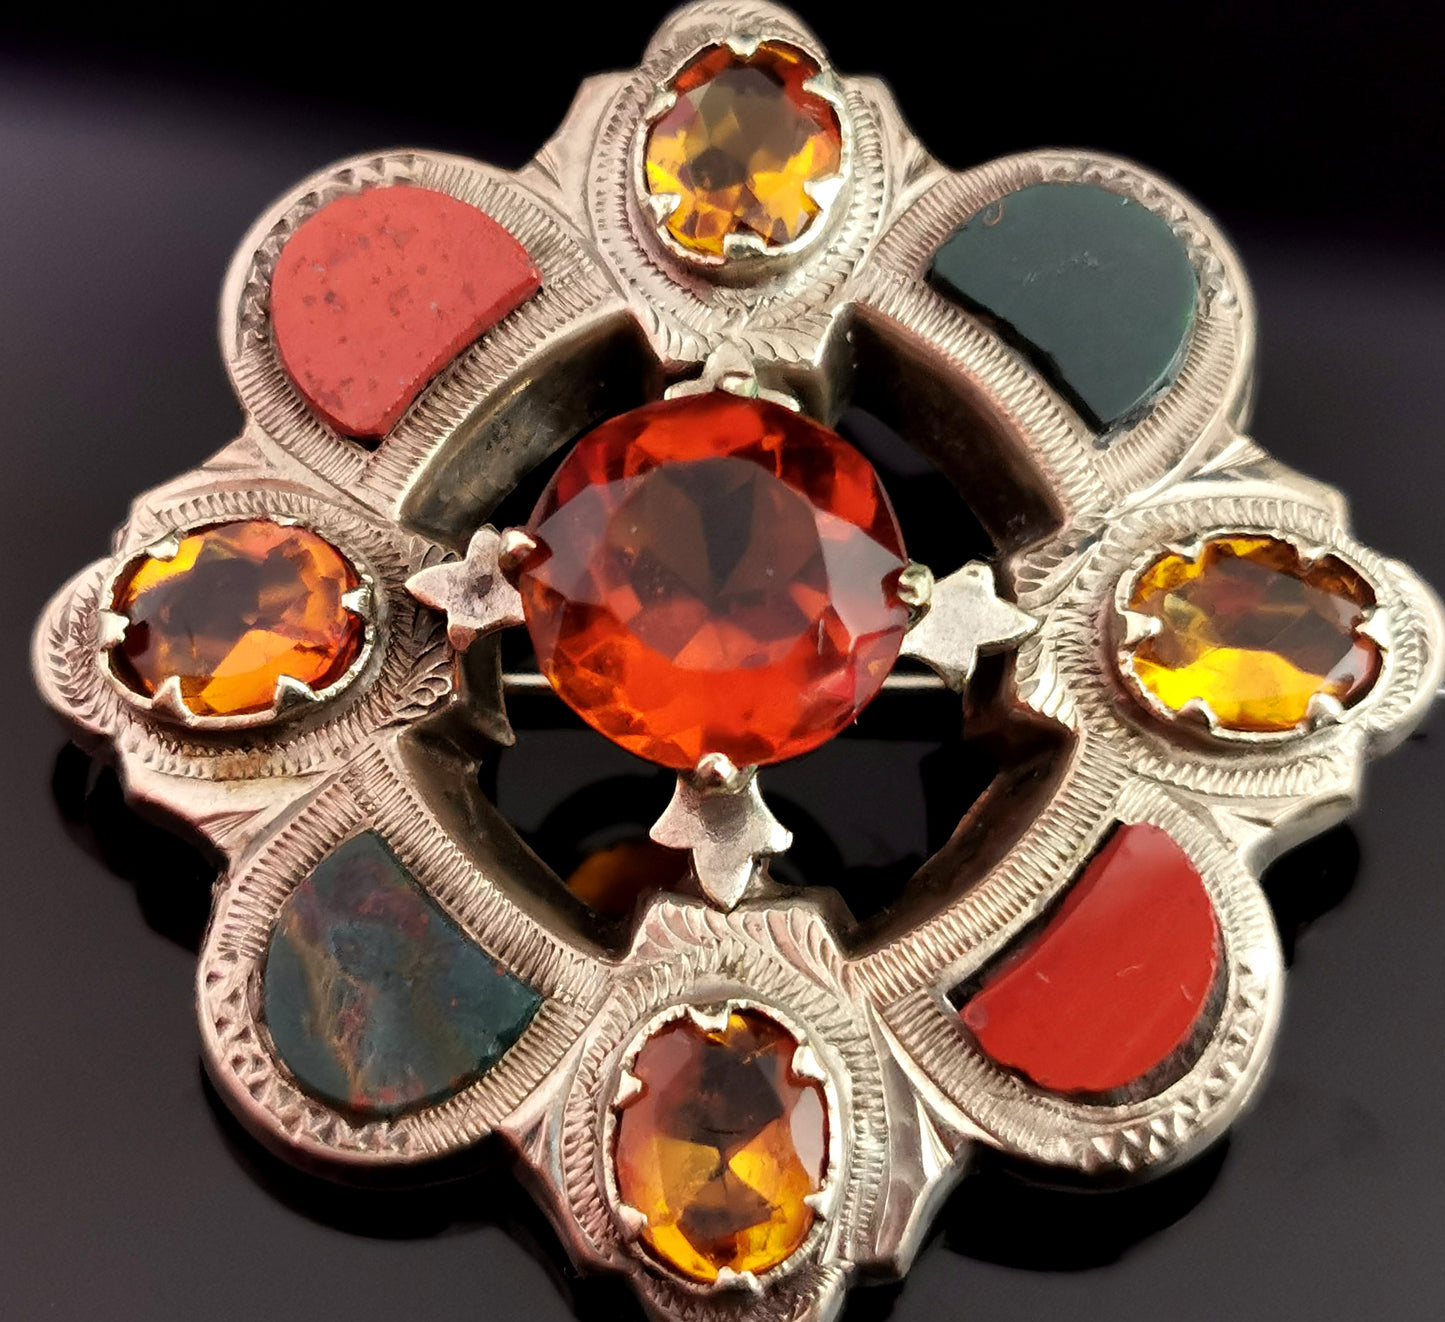 Antique Victorian Scottish silver and agate brooch, citrine